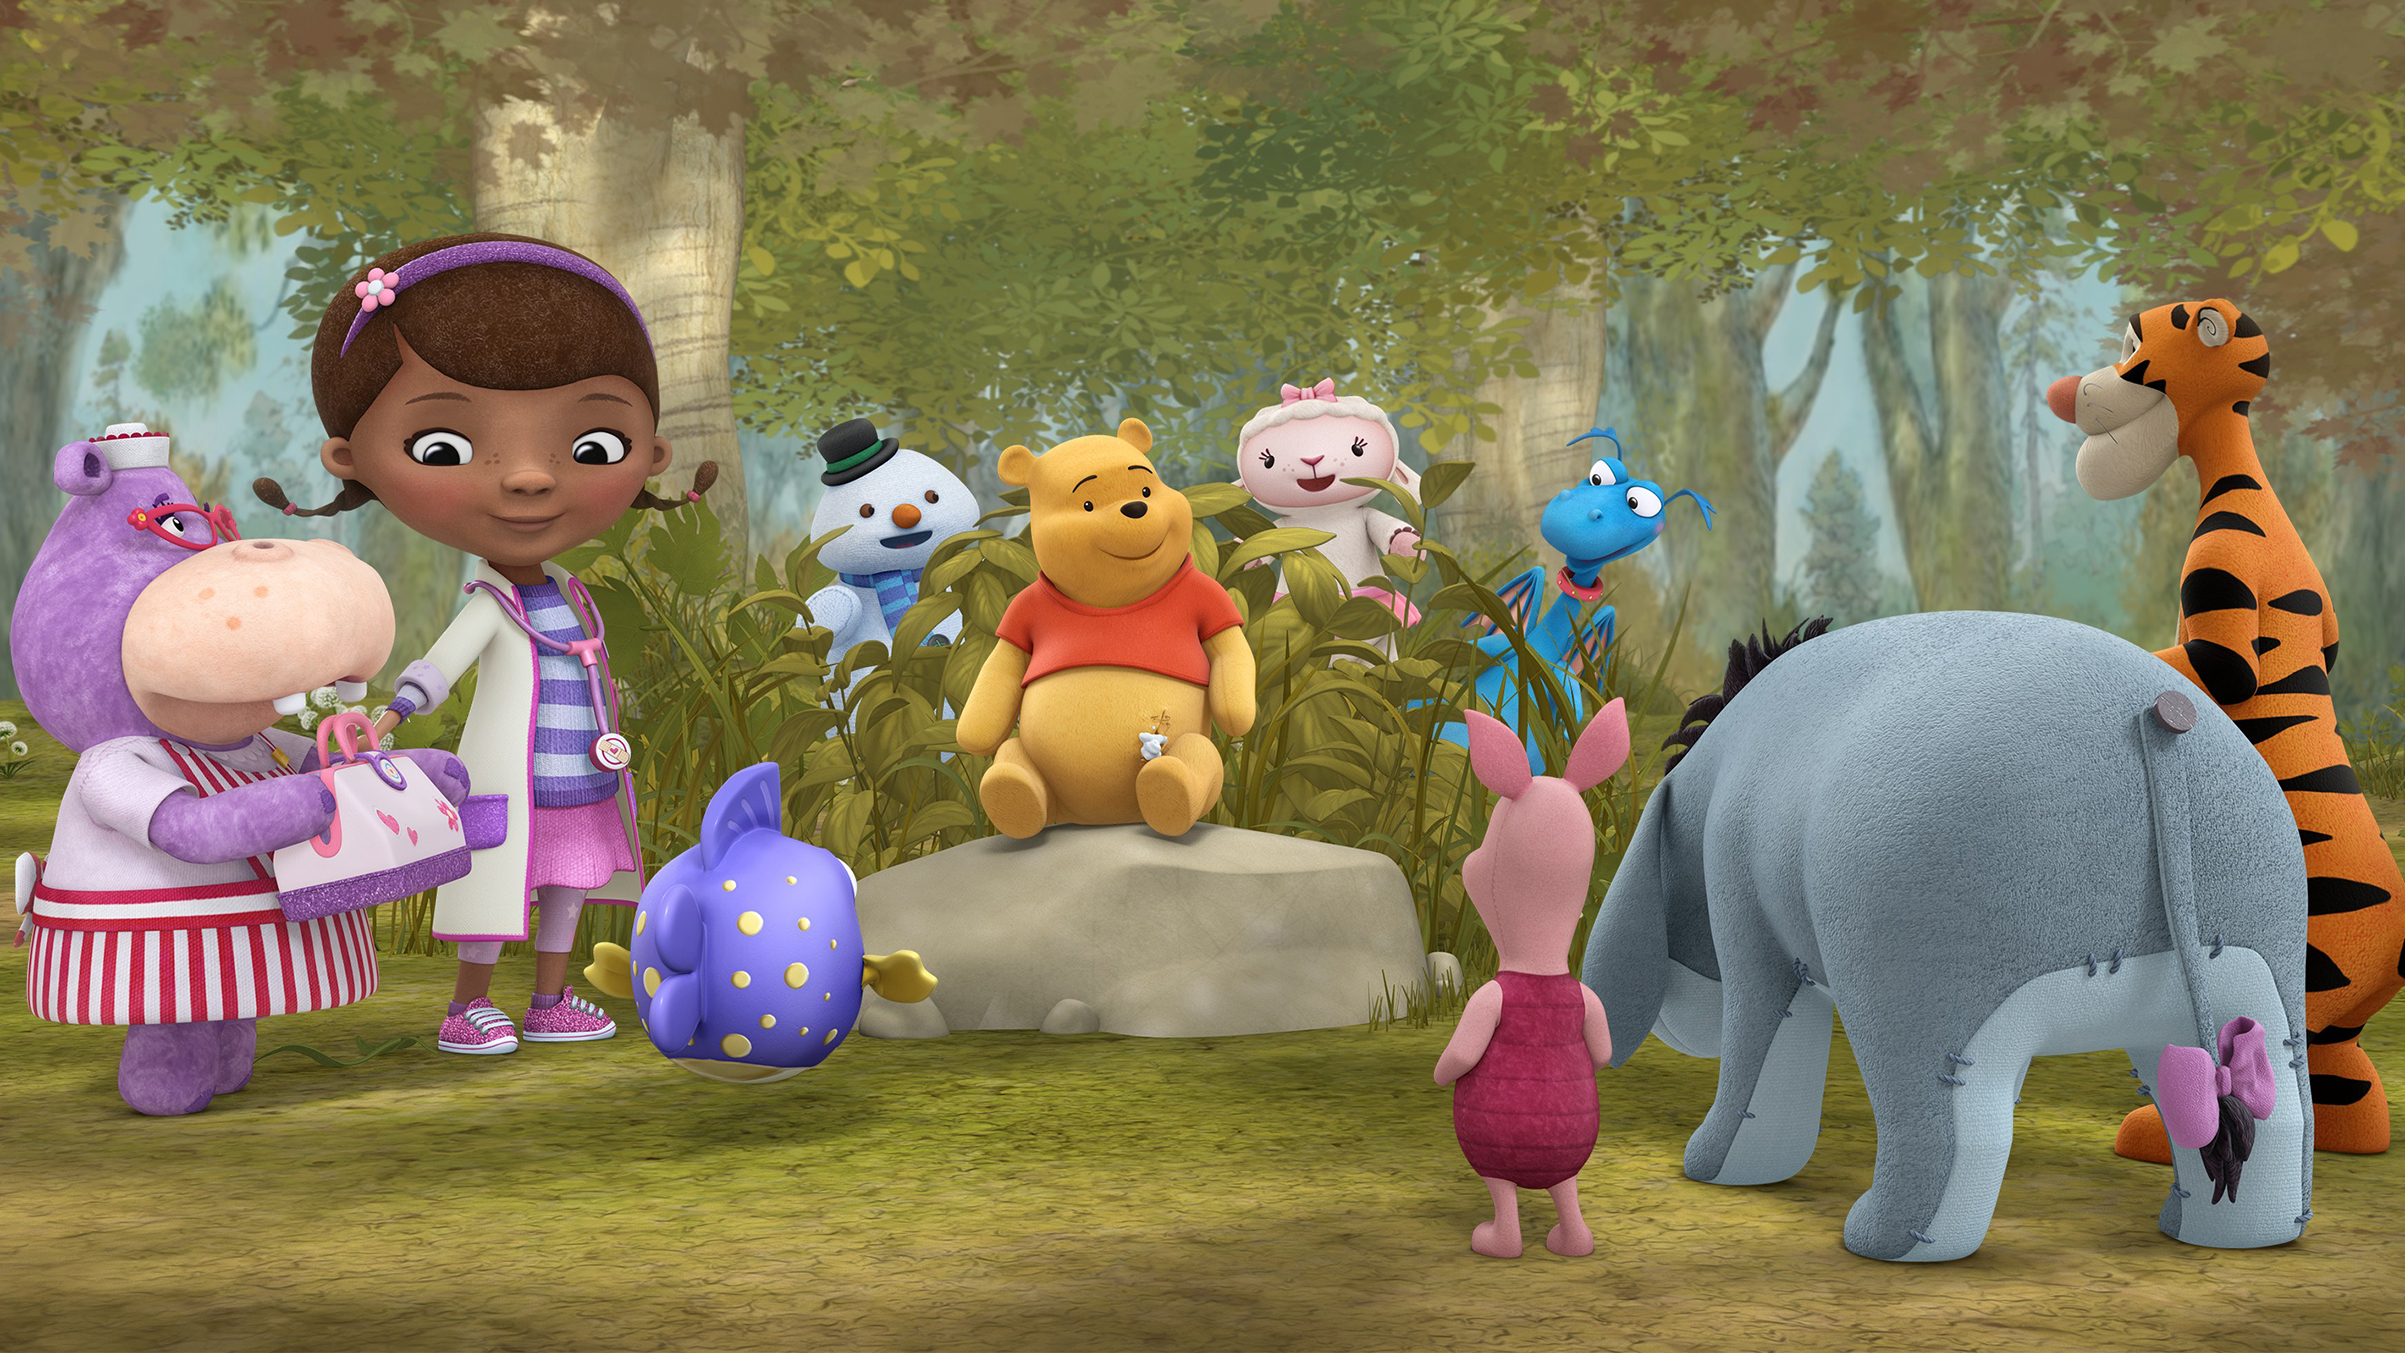 Doc ventures "Into the Hundred Acre Wood!" with her toys and welcomes Winnie the Pooh and friends to McStuffinsville in Disney Junior's "Doc McStuffins" on January 18, 2017. (Disney)